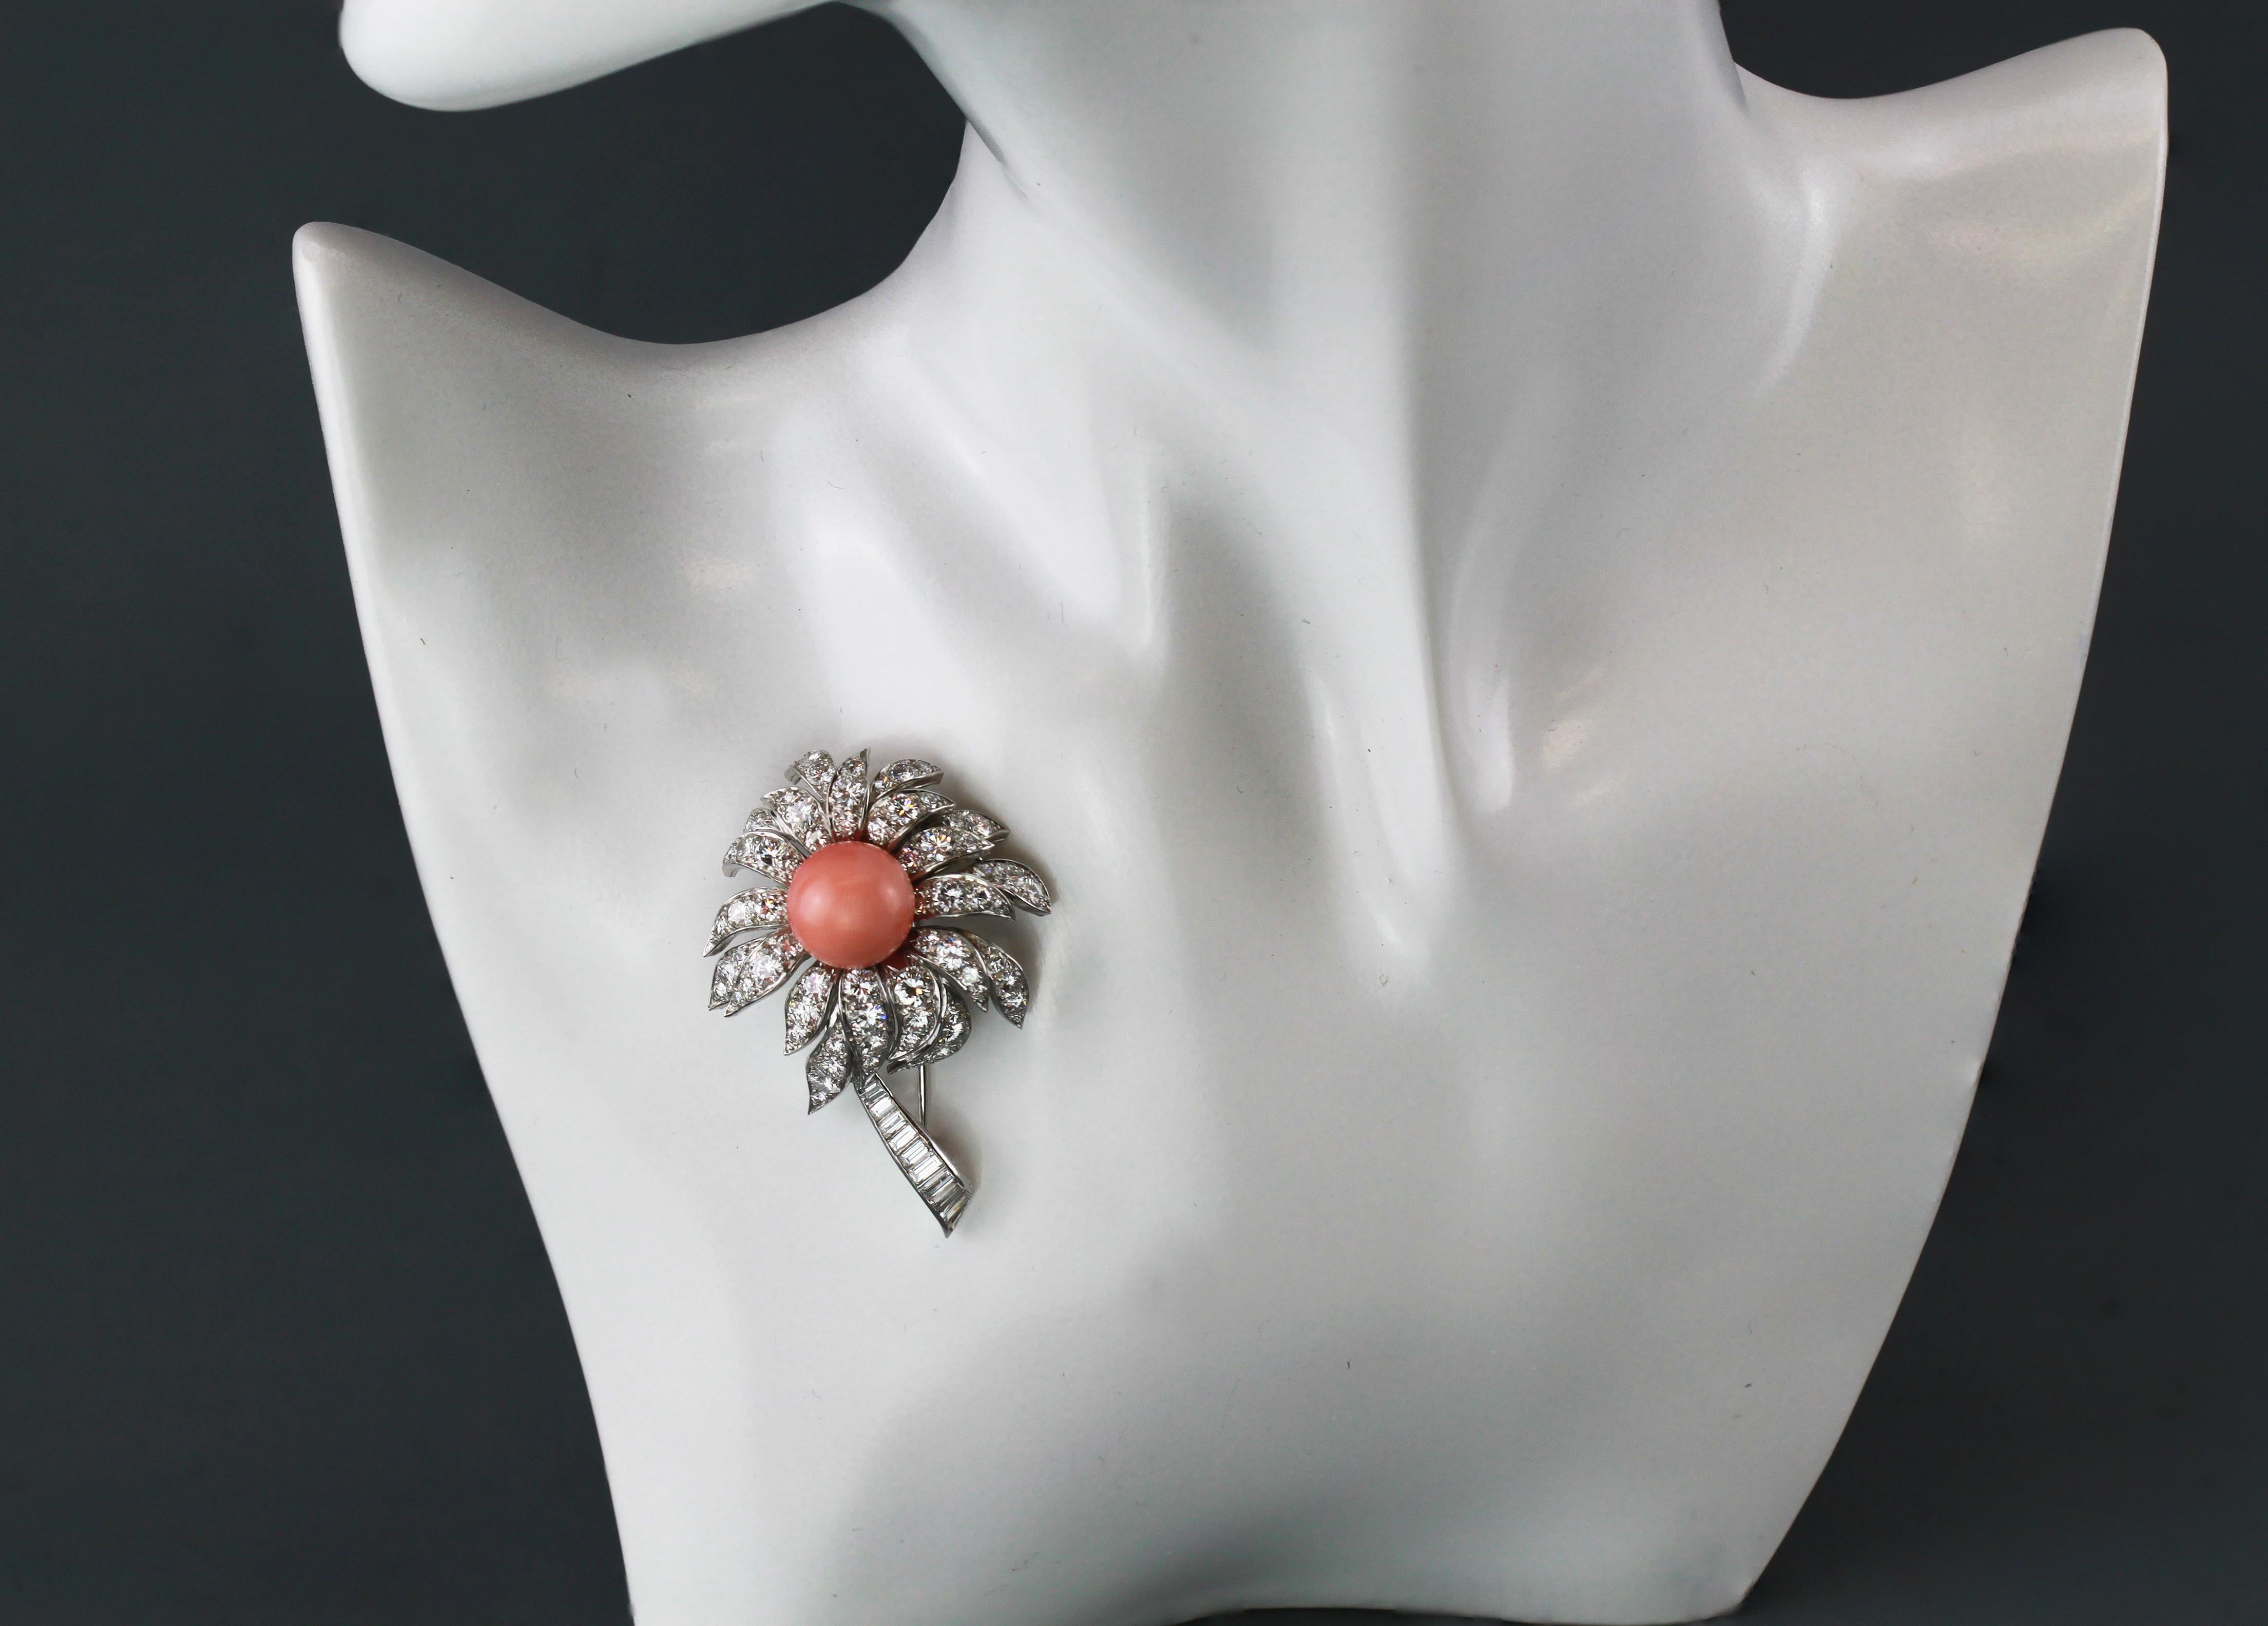 Boucheron 18kt white gold flower shaped brooch with a central coral stone of approx 7 carats, and diamond decorated flower petals.
Designer: Boucheron
Made in France, Paris 1990's
Fully hallmarked.

Dimension - 
Size : 5.3 x 3.5 x 2 cm
Weight : 23